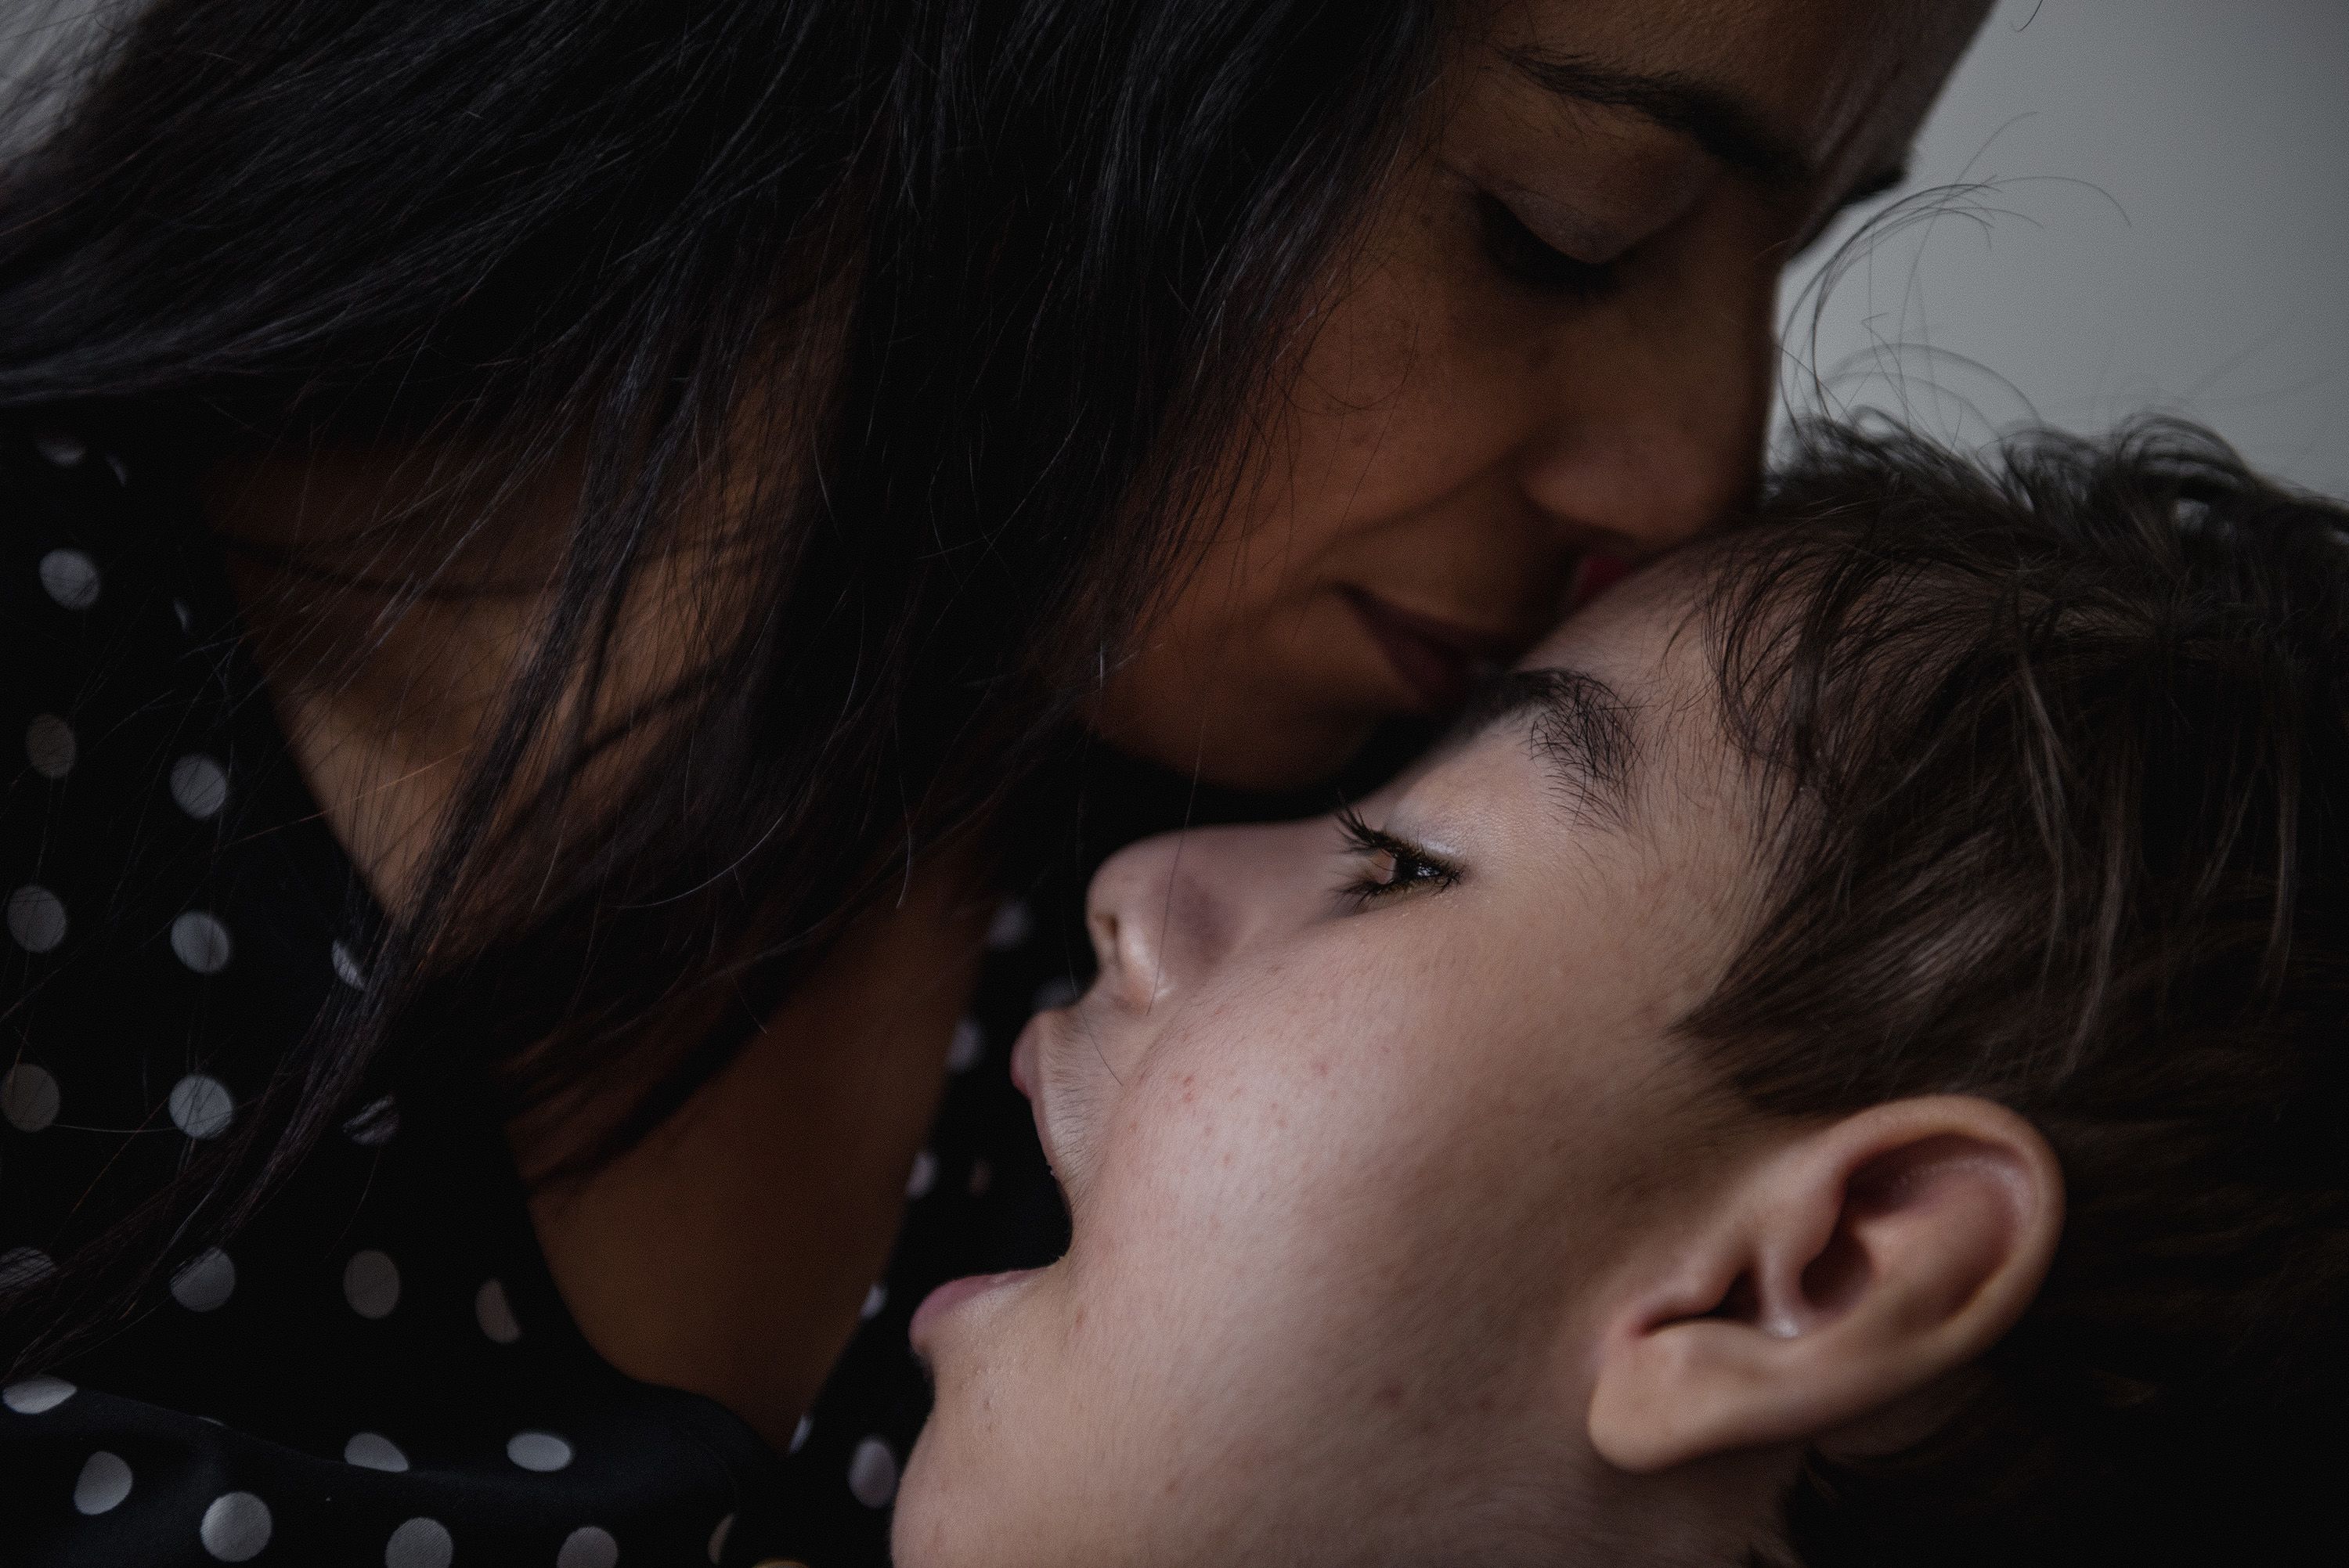 A woman named Regina kisses her son Davi, who was born with microcephaly, a condition where the baby's head is much smaller than expected. Davi was one of thousands of Brazilian children born with the condition during a Zika virus outbreak a few years ago. The doctor told her that her son was going to die and that she should get used to it, Regina told photographer <a href="index.php?page=&url=https%3A%2F%2Fmairaerlich.com%2F" target="_blank" target="_blank">Maíra Erlich</a>. "How does a doctor say that?" Regina said. "So, I asked him, 'Are you God?' He told me Davi had a tiny head, and I said: 'He's beautiful.' That's it.' "